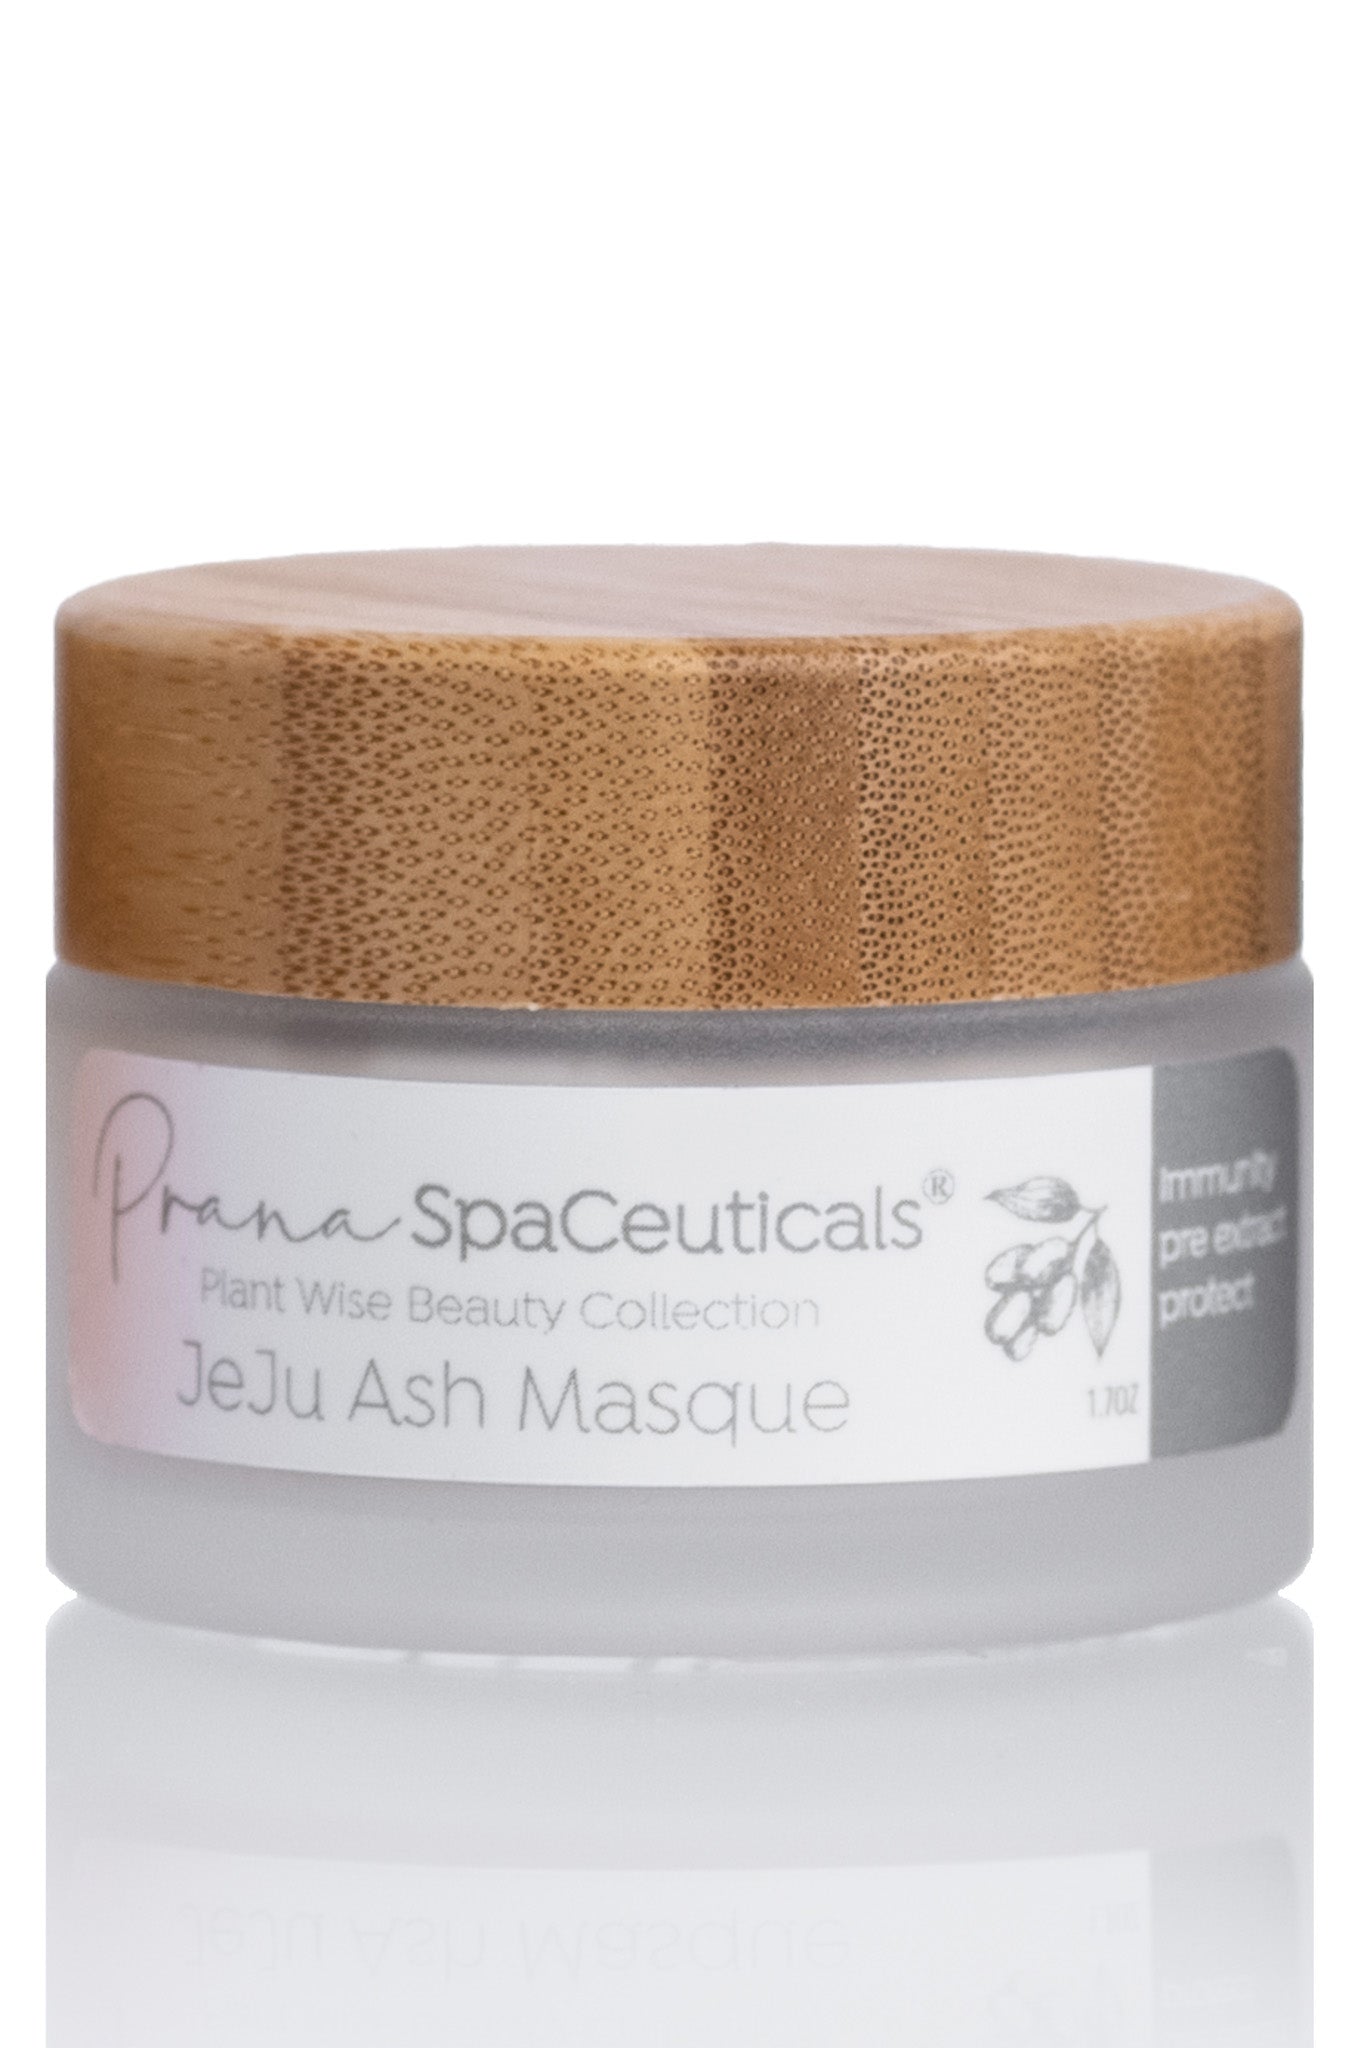 PLANT WISE BEAUTY COLLECTION: JeJu Ash Masque